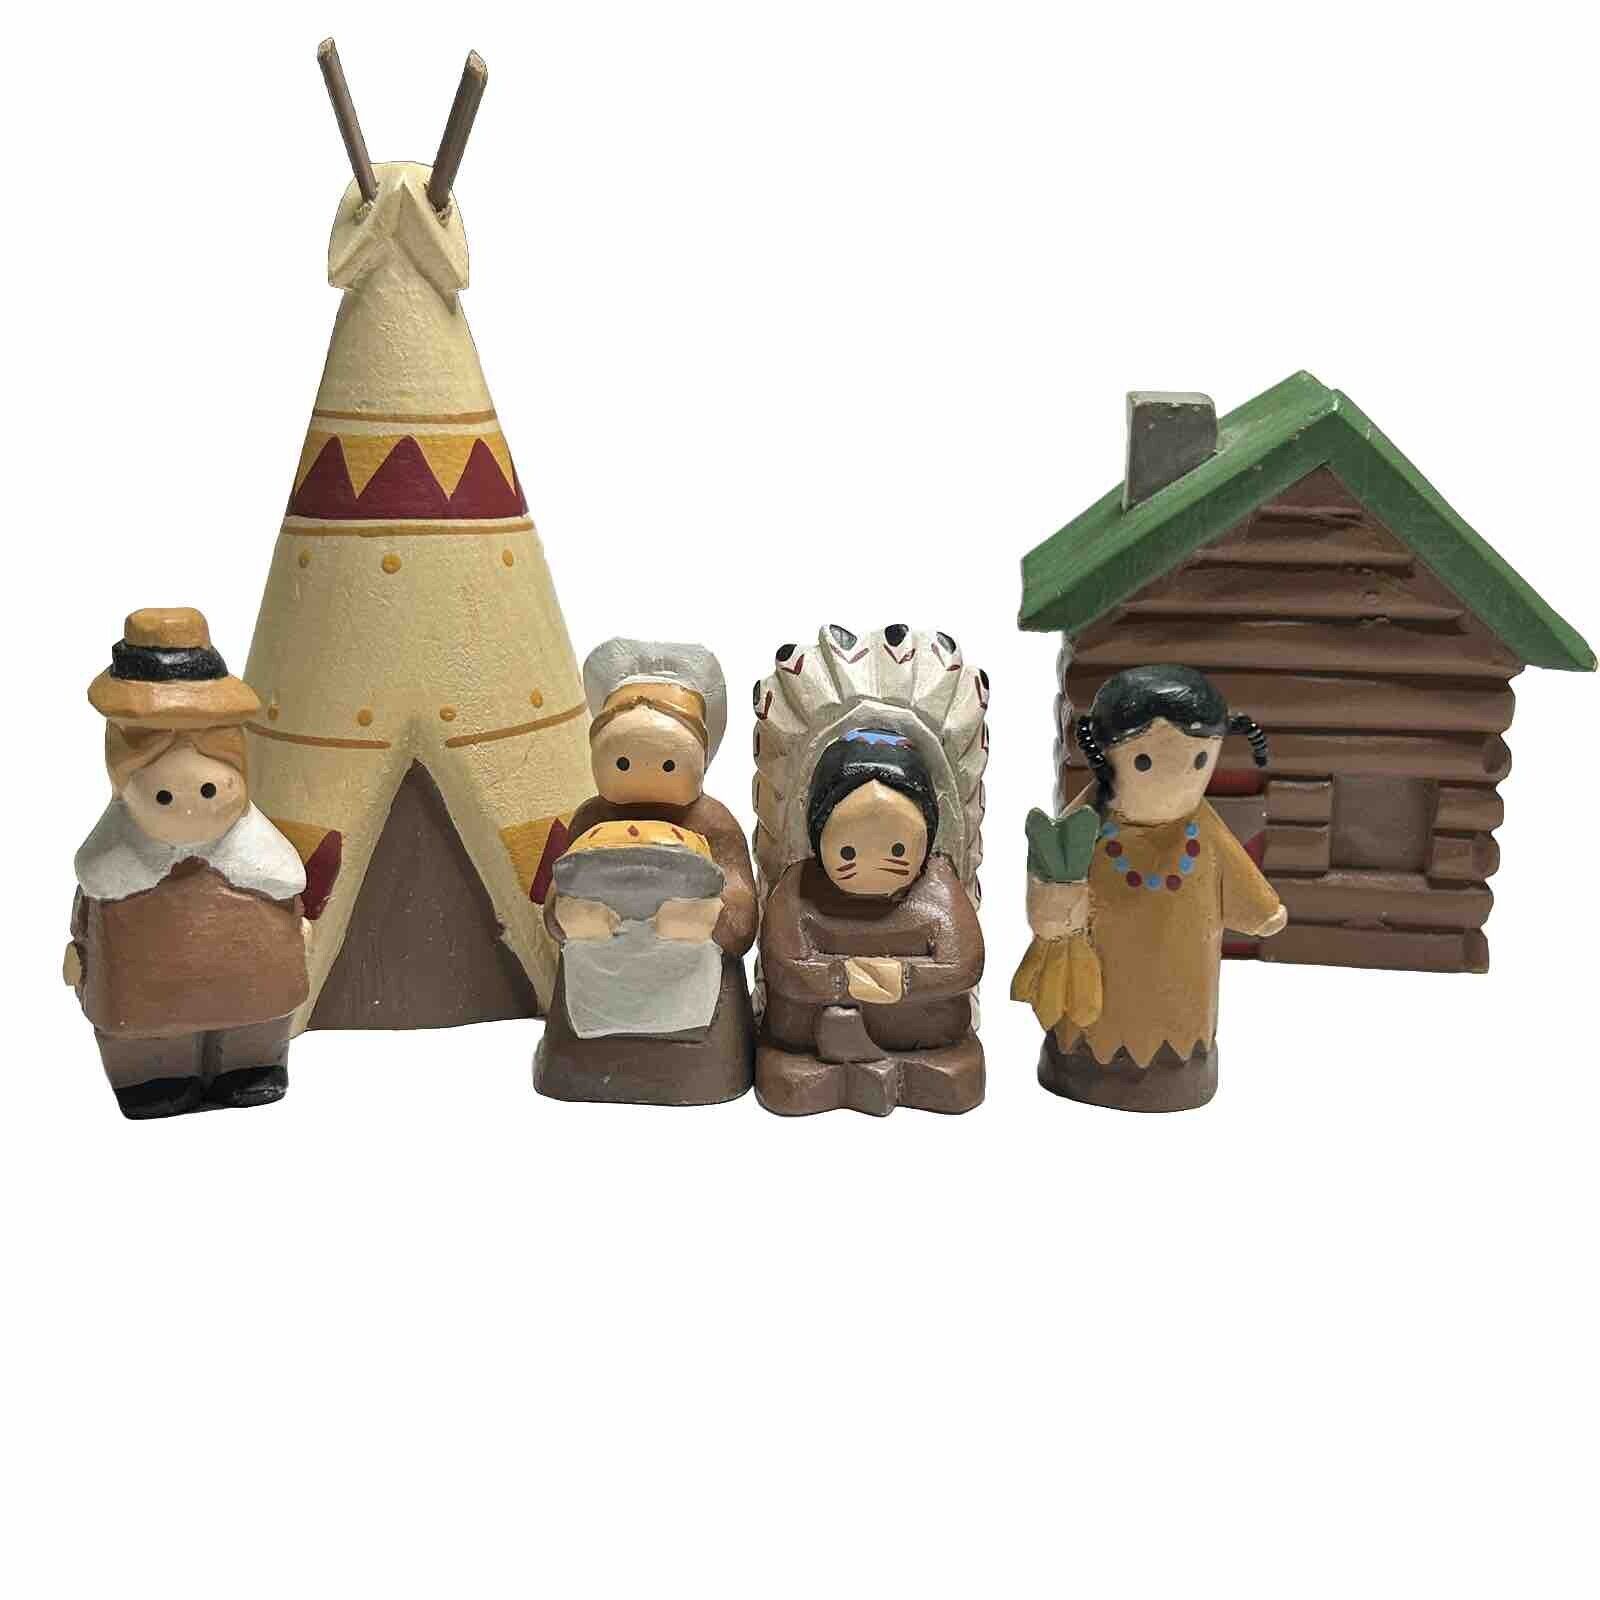 Wood Carved Native Americans & Pilgrims Teepee Midwest Imports of Cannon Falls?